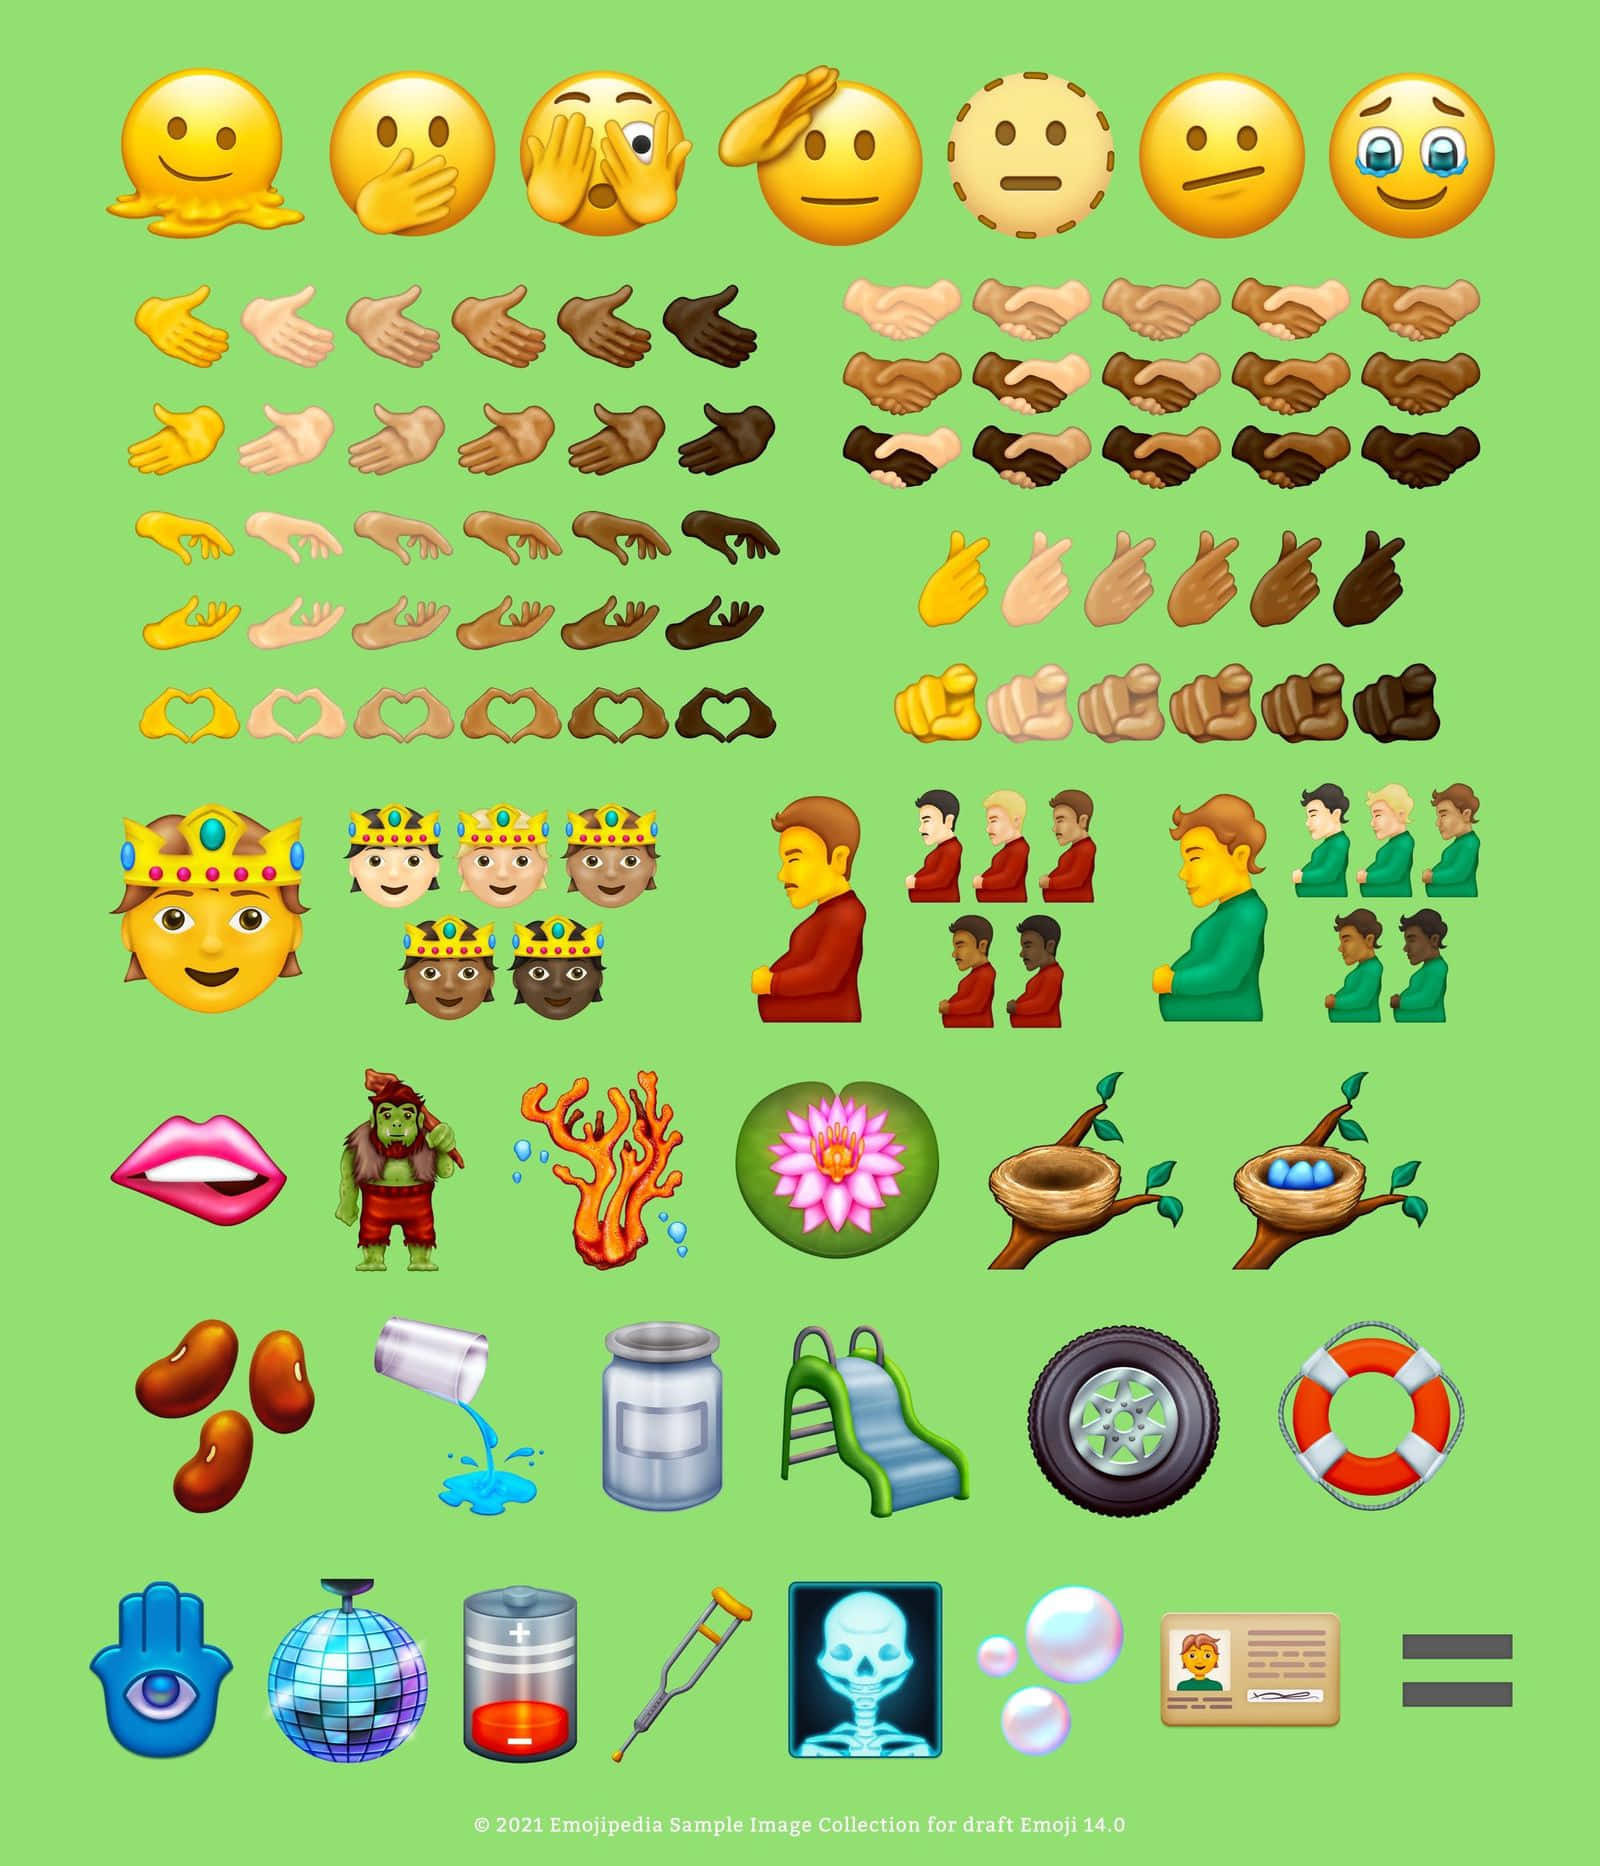 Express Yourself with Emoji!